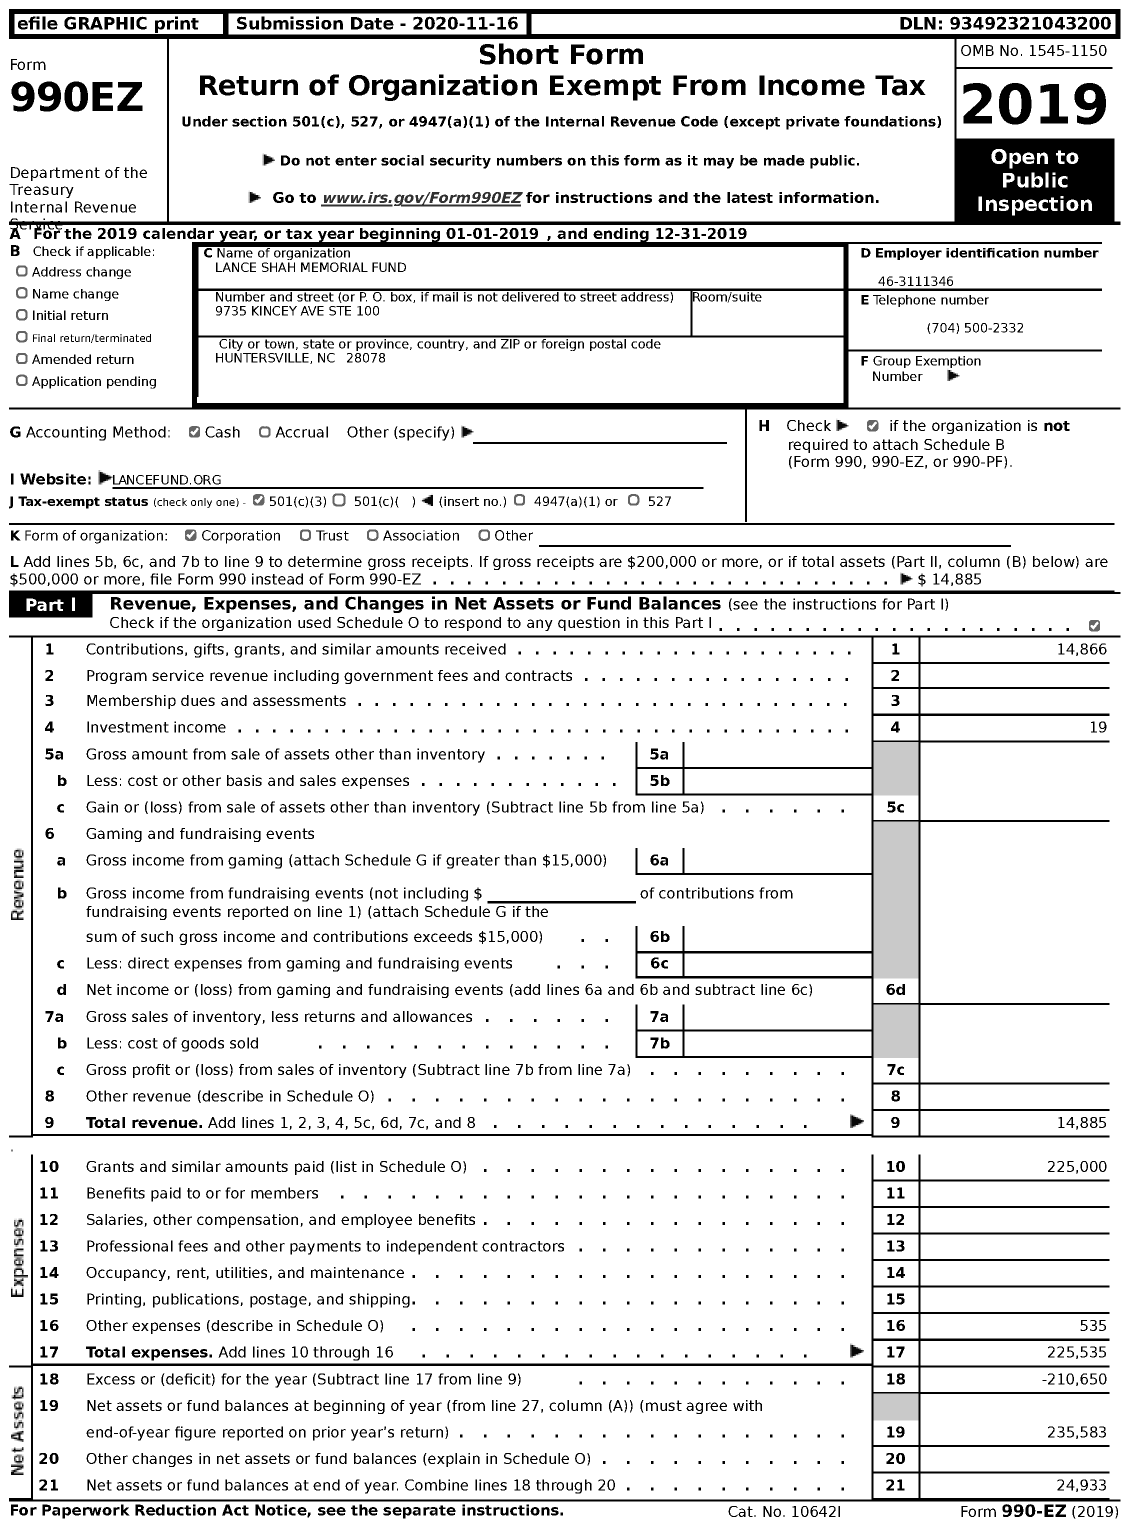 Image of first page of 2019 Form 990EZ for Lance Shah Memorial Fund